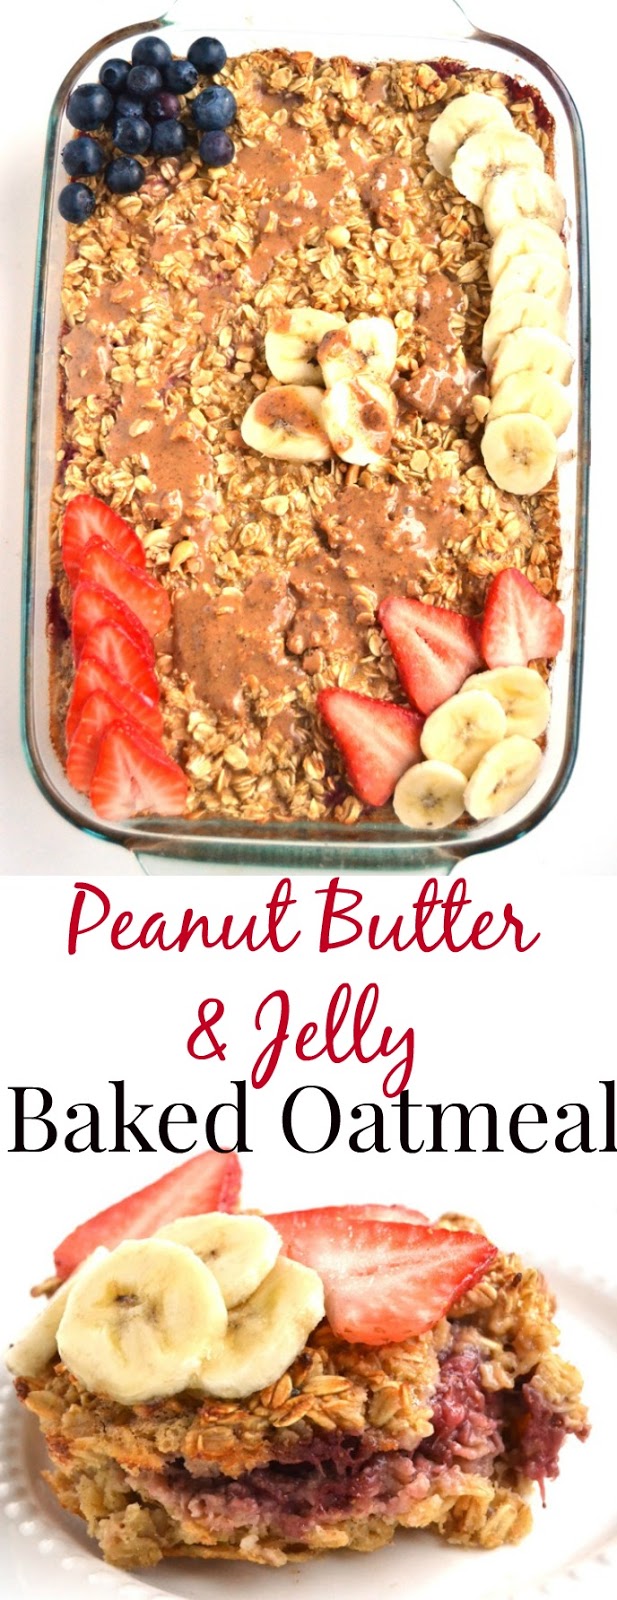 Peanut Butter and Jelly Baked Oatmeal is stuffed with a fresh strawberry jam layer, ready in just 30 minutes and is topped with drippy peanut butter and fresh fruit for a healthy and filling breakfast. www.nutritionistreviews.com